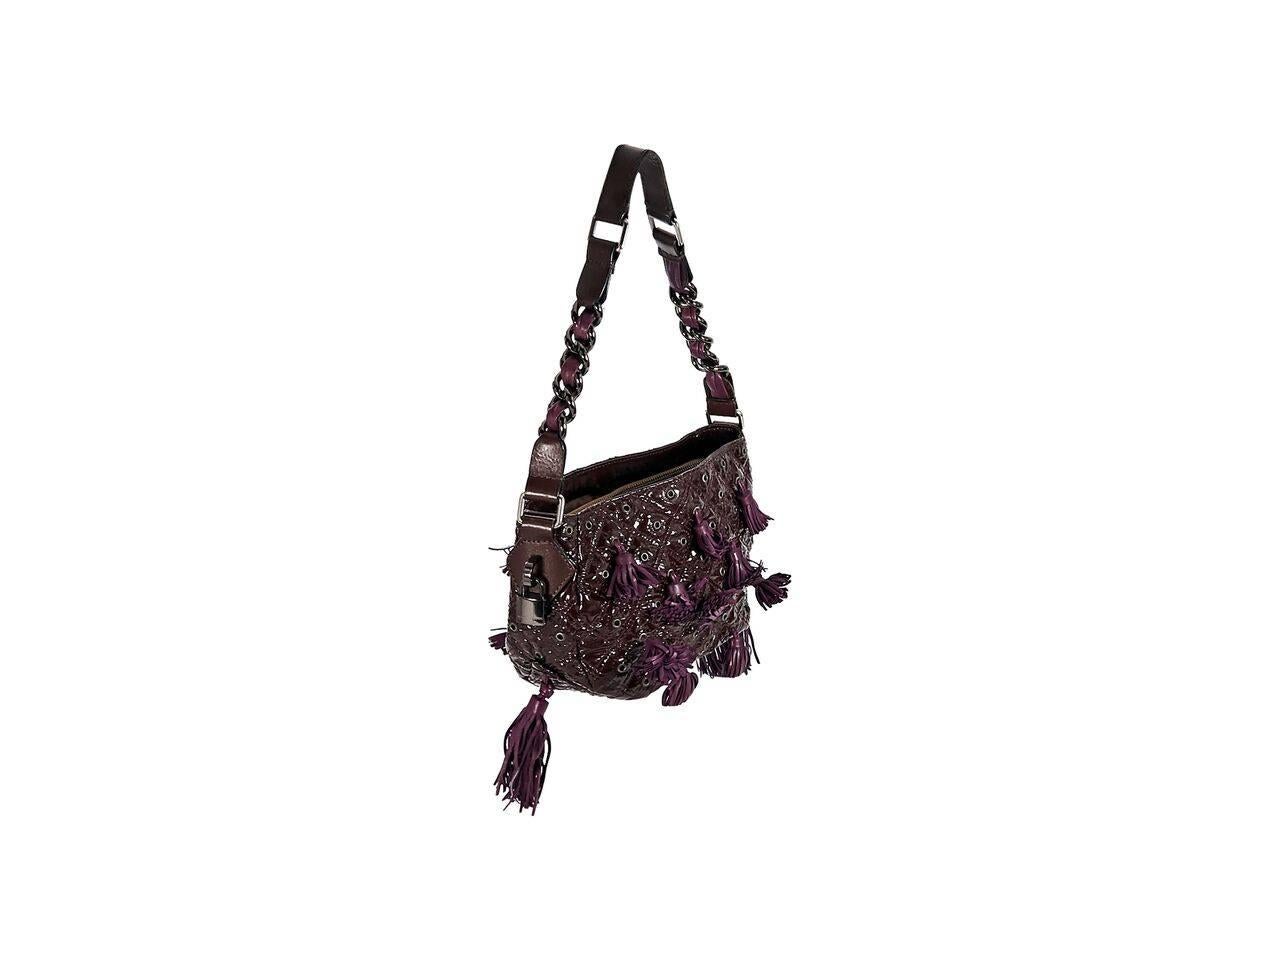 Product details:  Purple quilted patent leather Dancer shoulder bag by Marc Jacobs.  Accented with grommets and tassels.  Single shoulder strap.  Open top.  Lined interior with inner center zip compartment and zip pocket.  Gunmetal-tone hardware. 